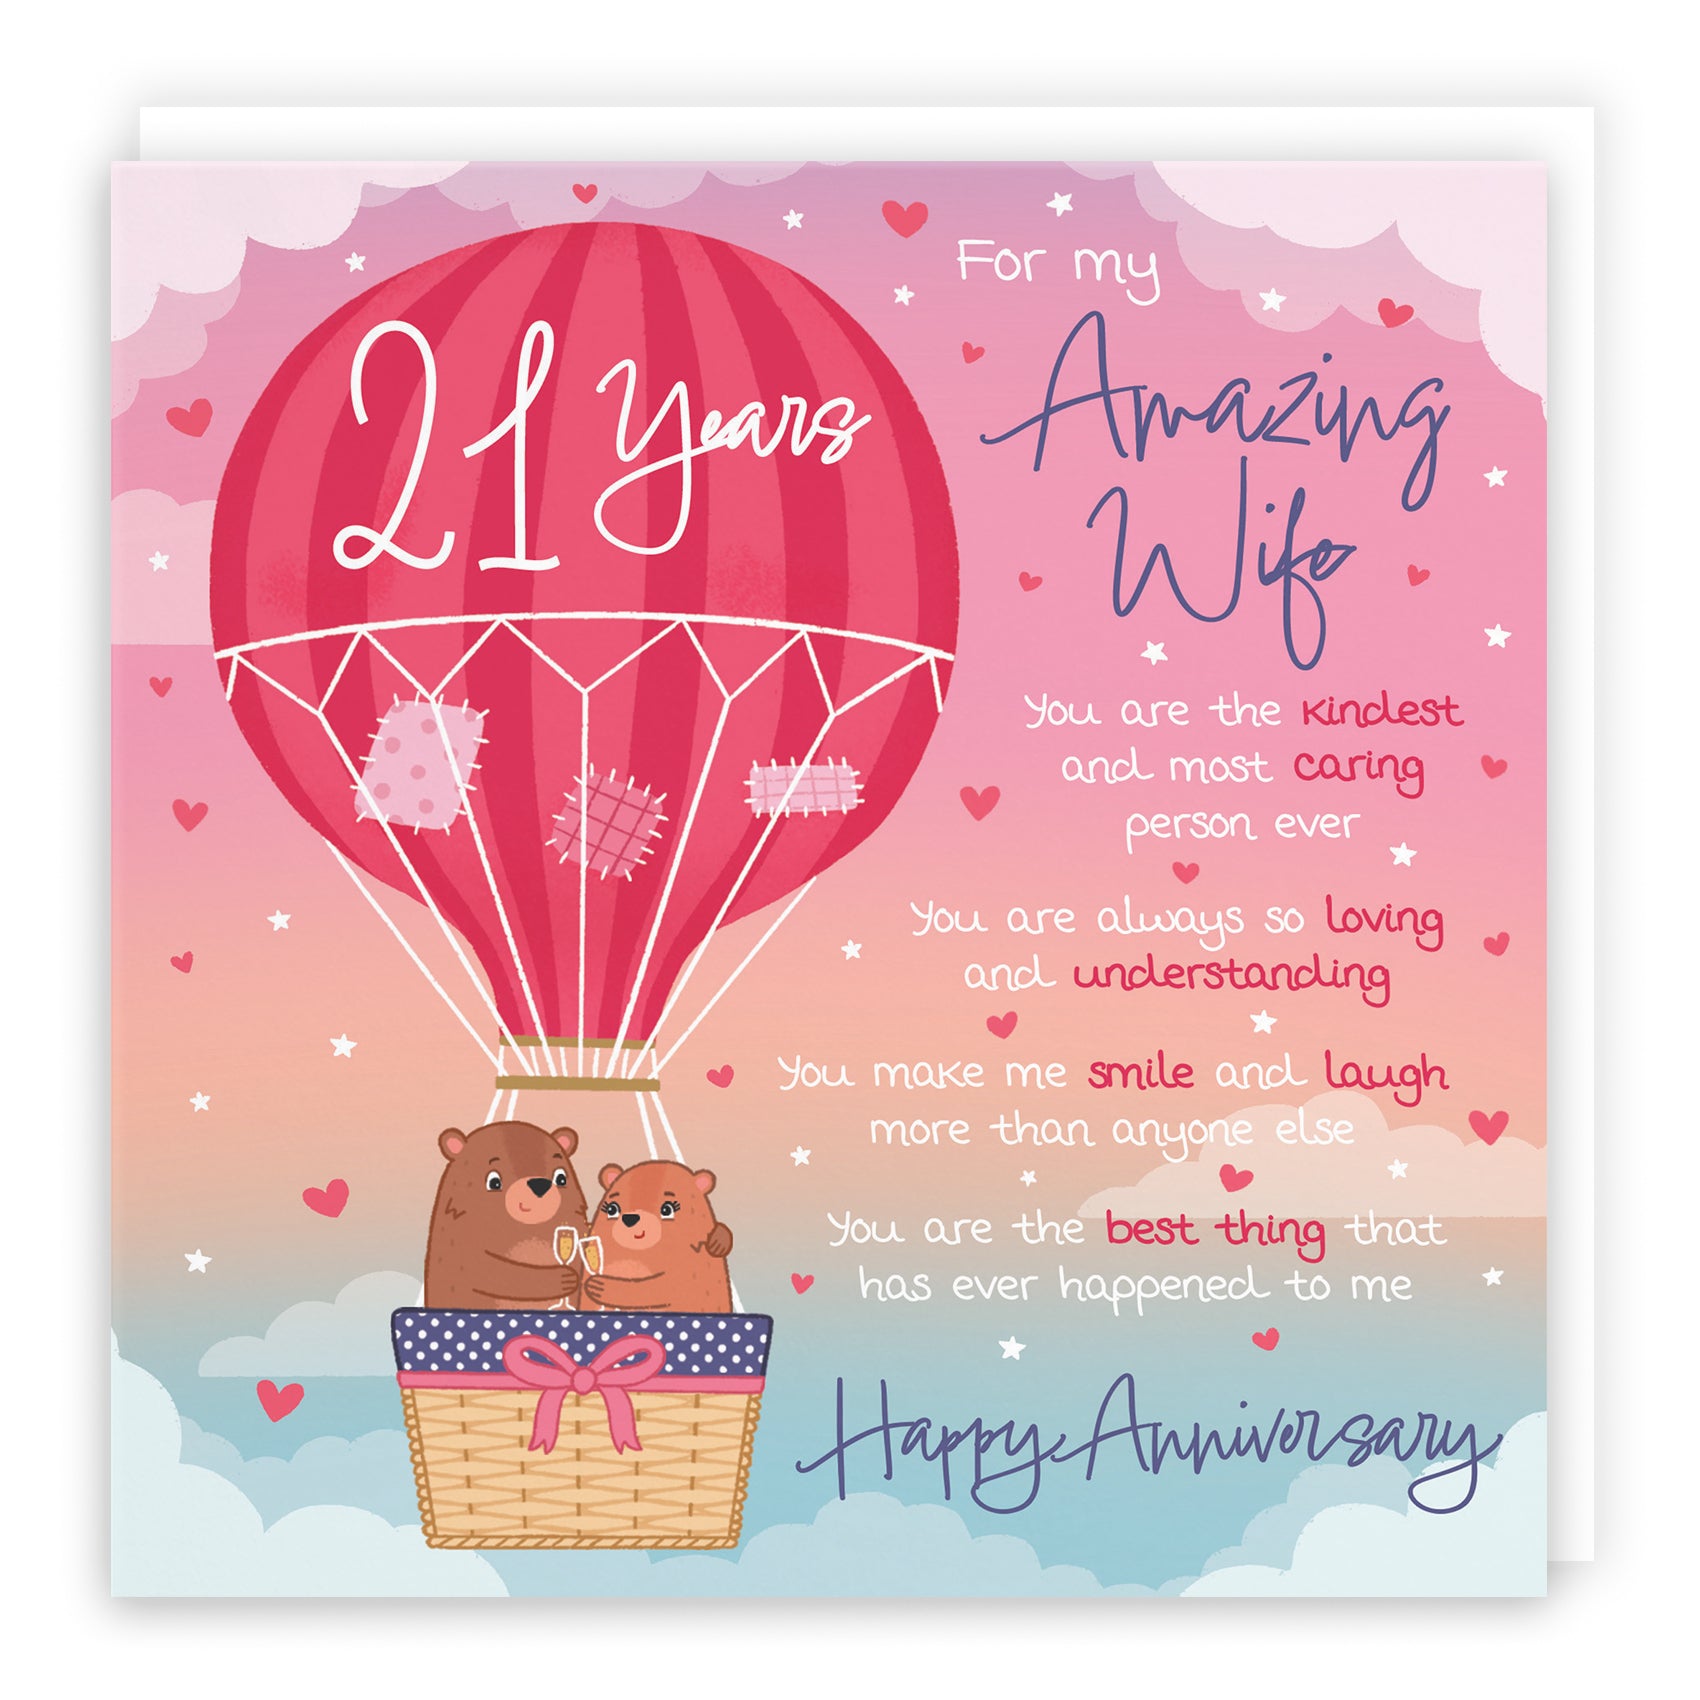 Wife 21st Anniversary Poem Card Love Is In The Air Cute Bears